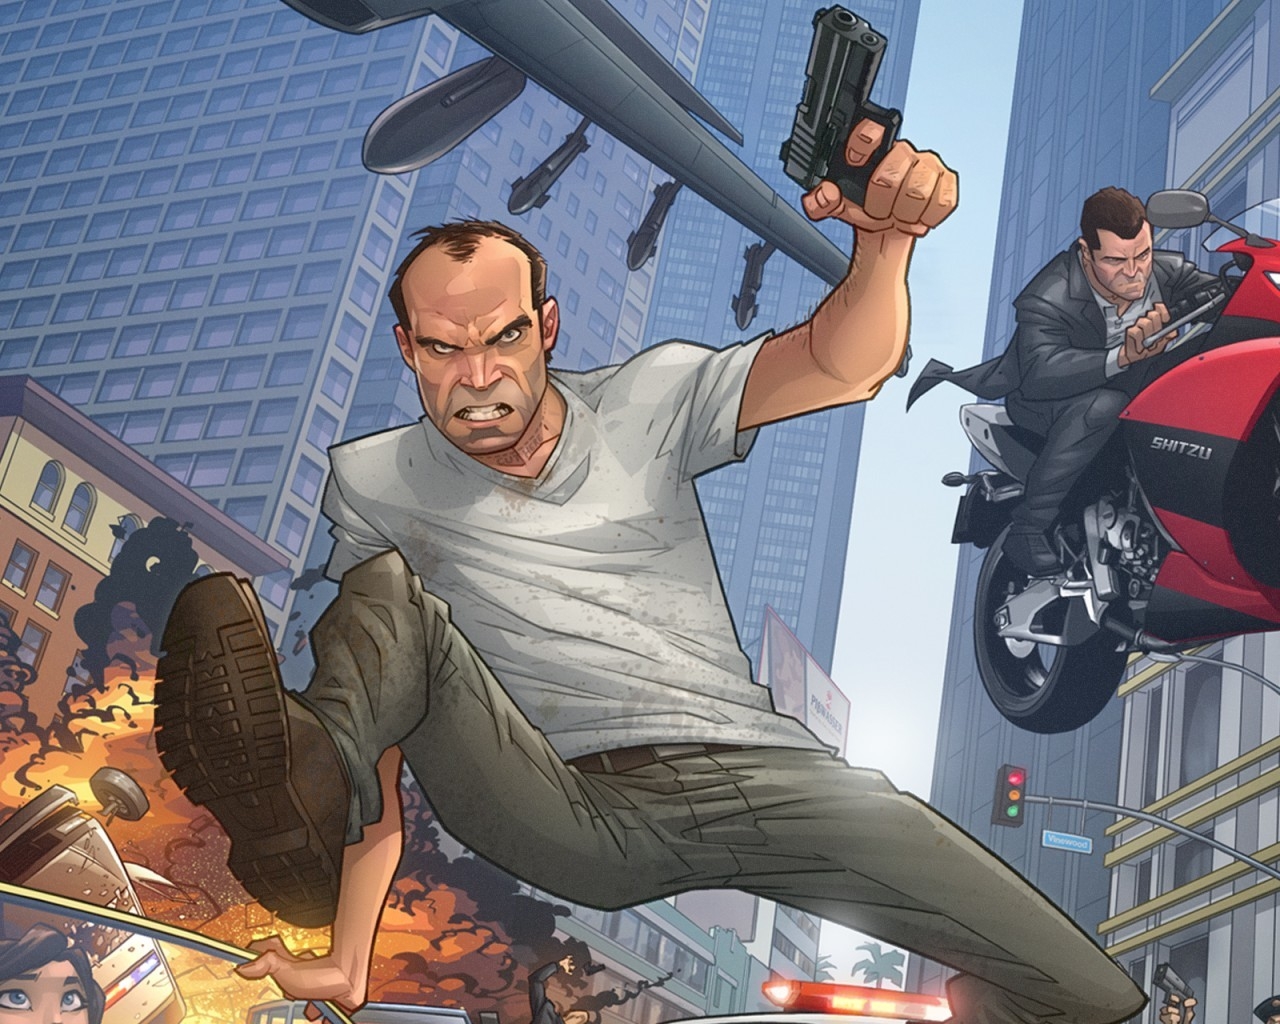 Grand Theft Auto V Game Poster for 1280 x 1024 resolution